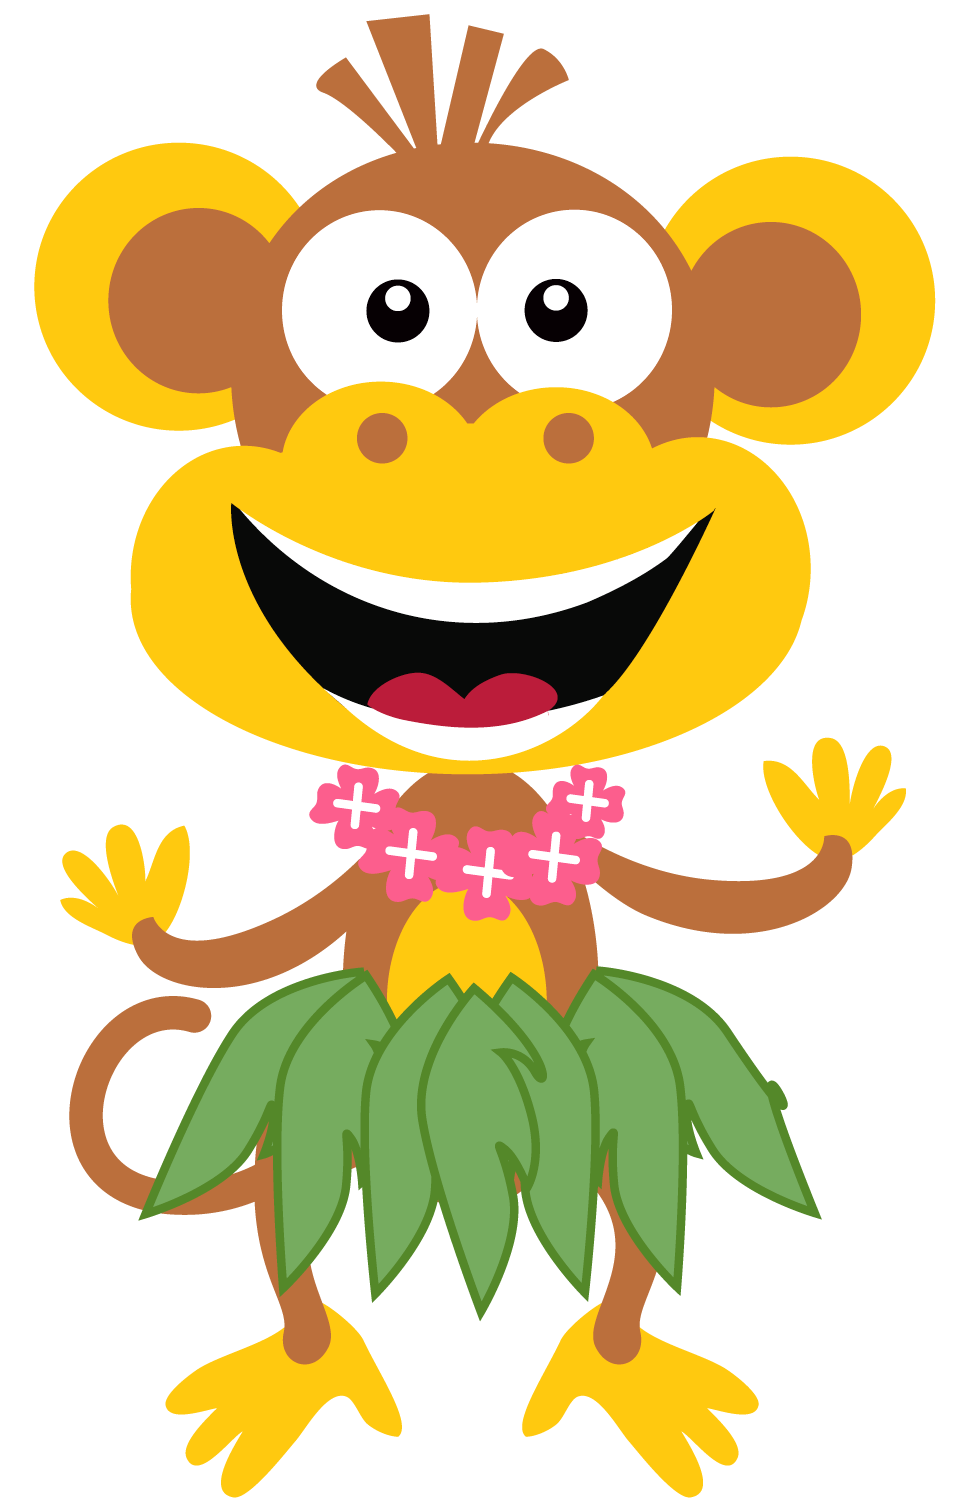 Silly summer fun free clipart